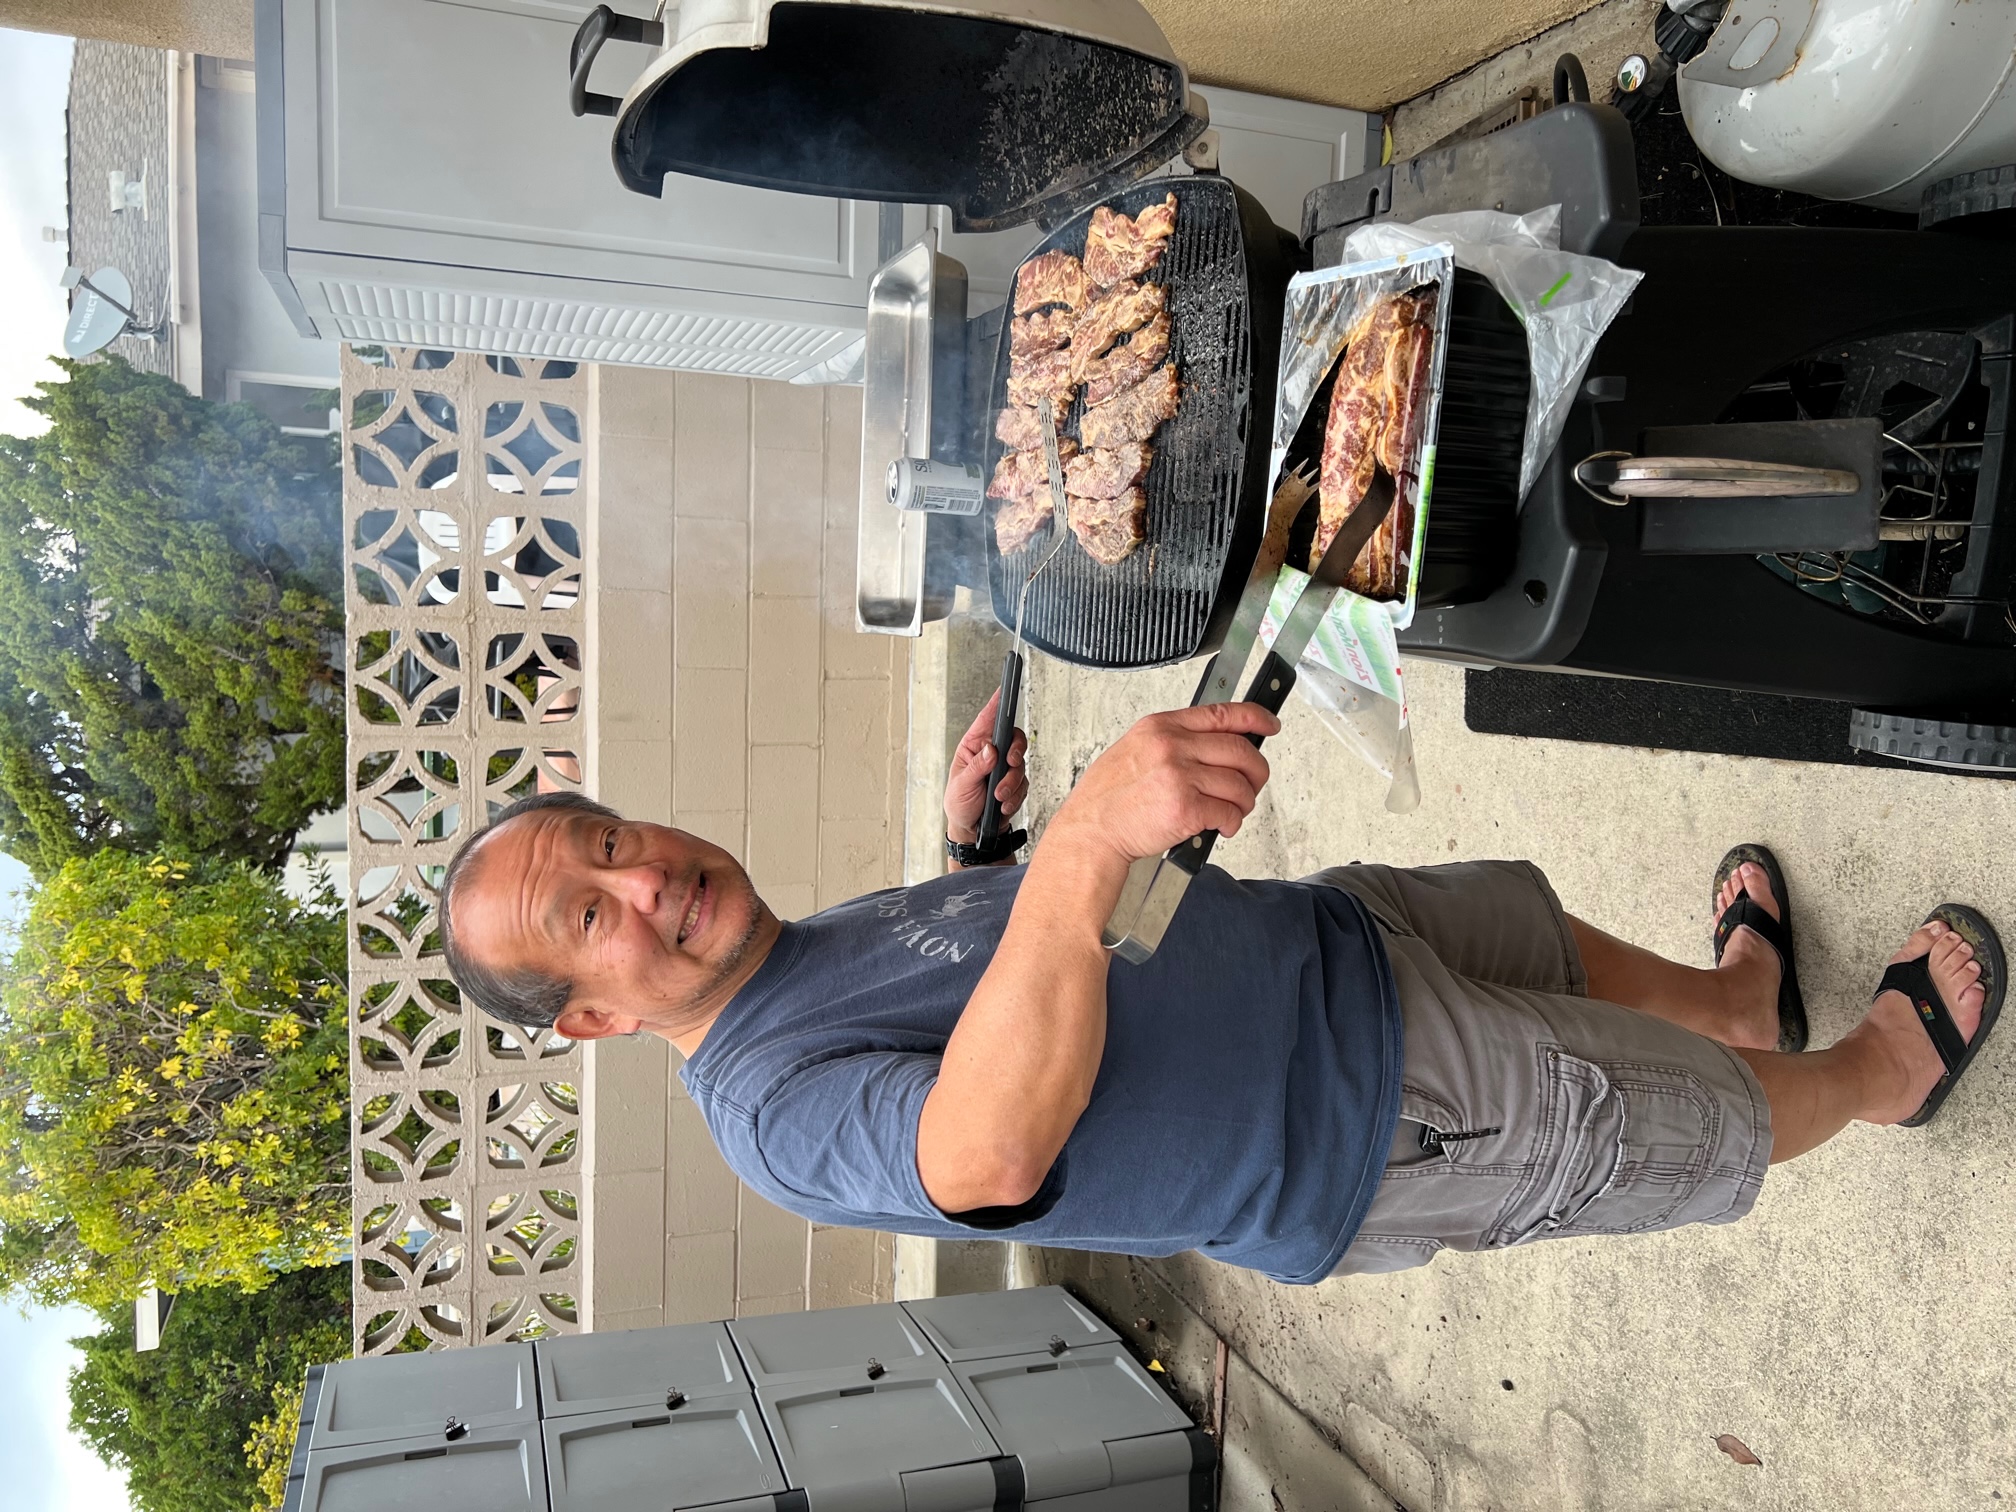 Dr. Rho grilling for everyone 